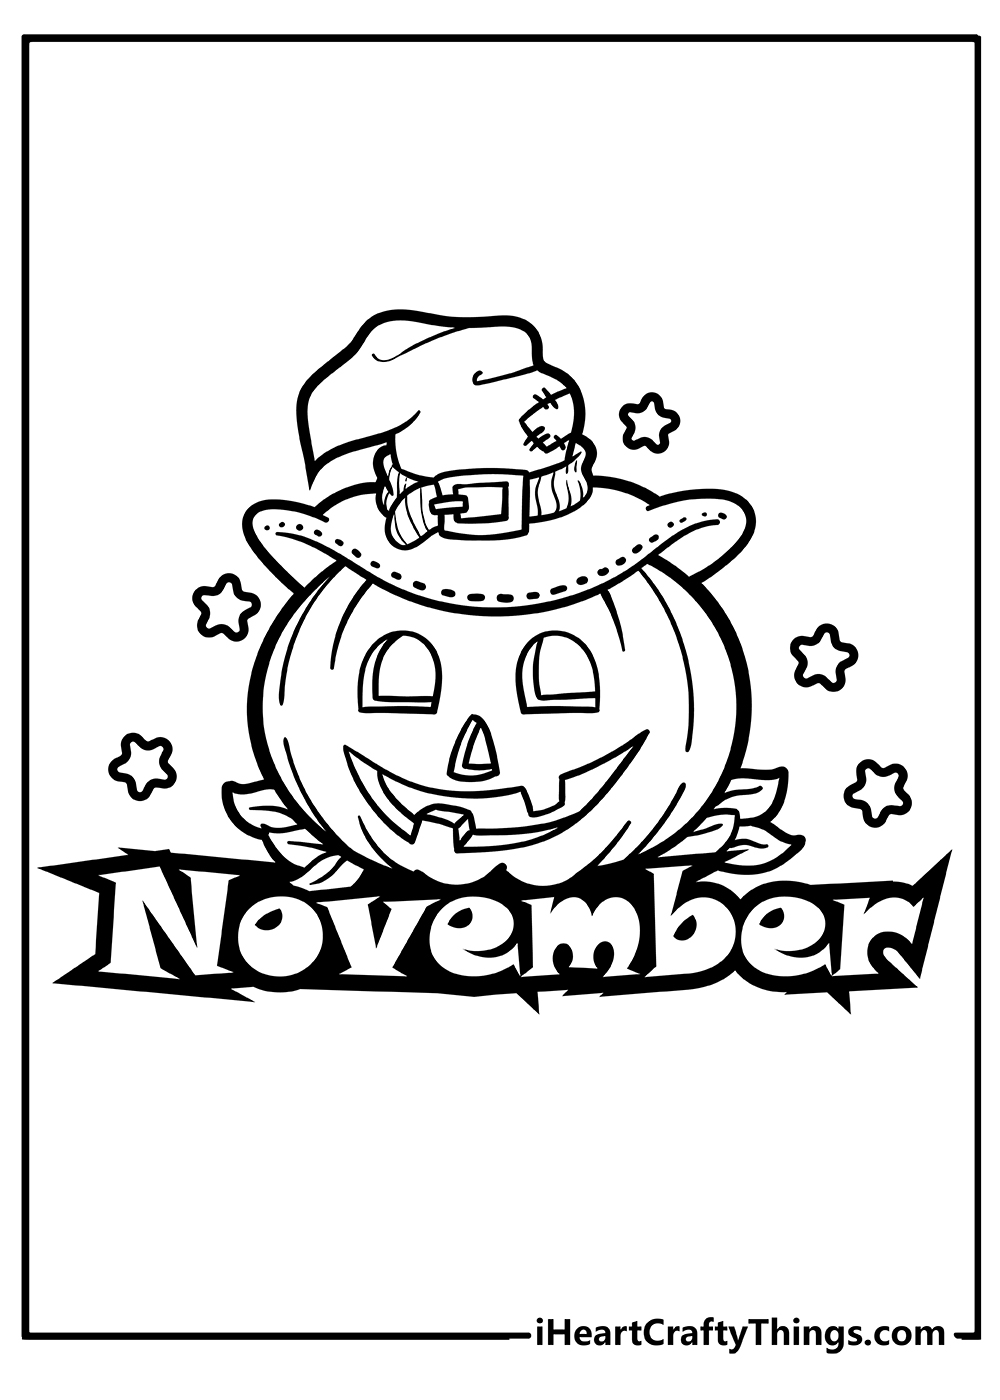 November Coloring Pages for adults free printable